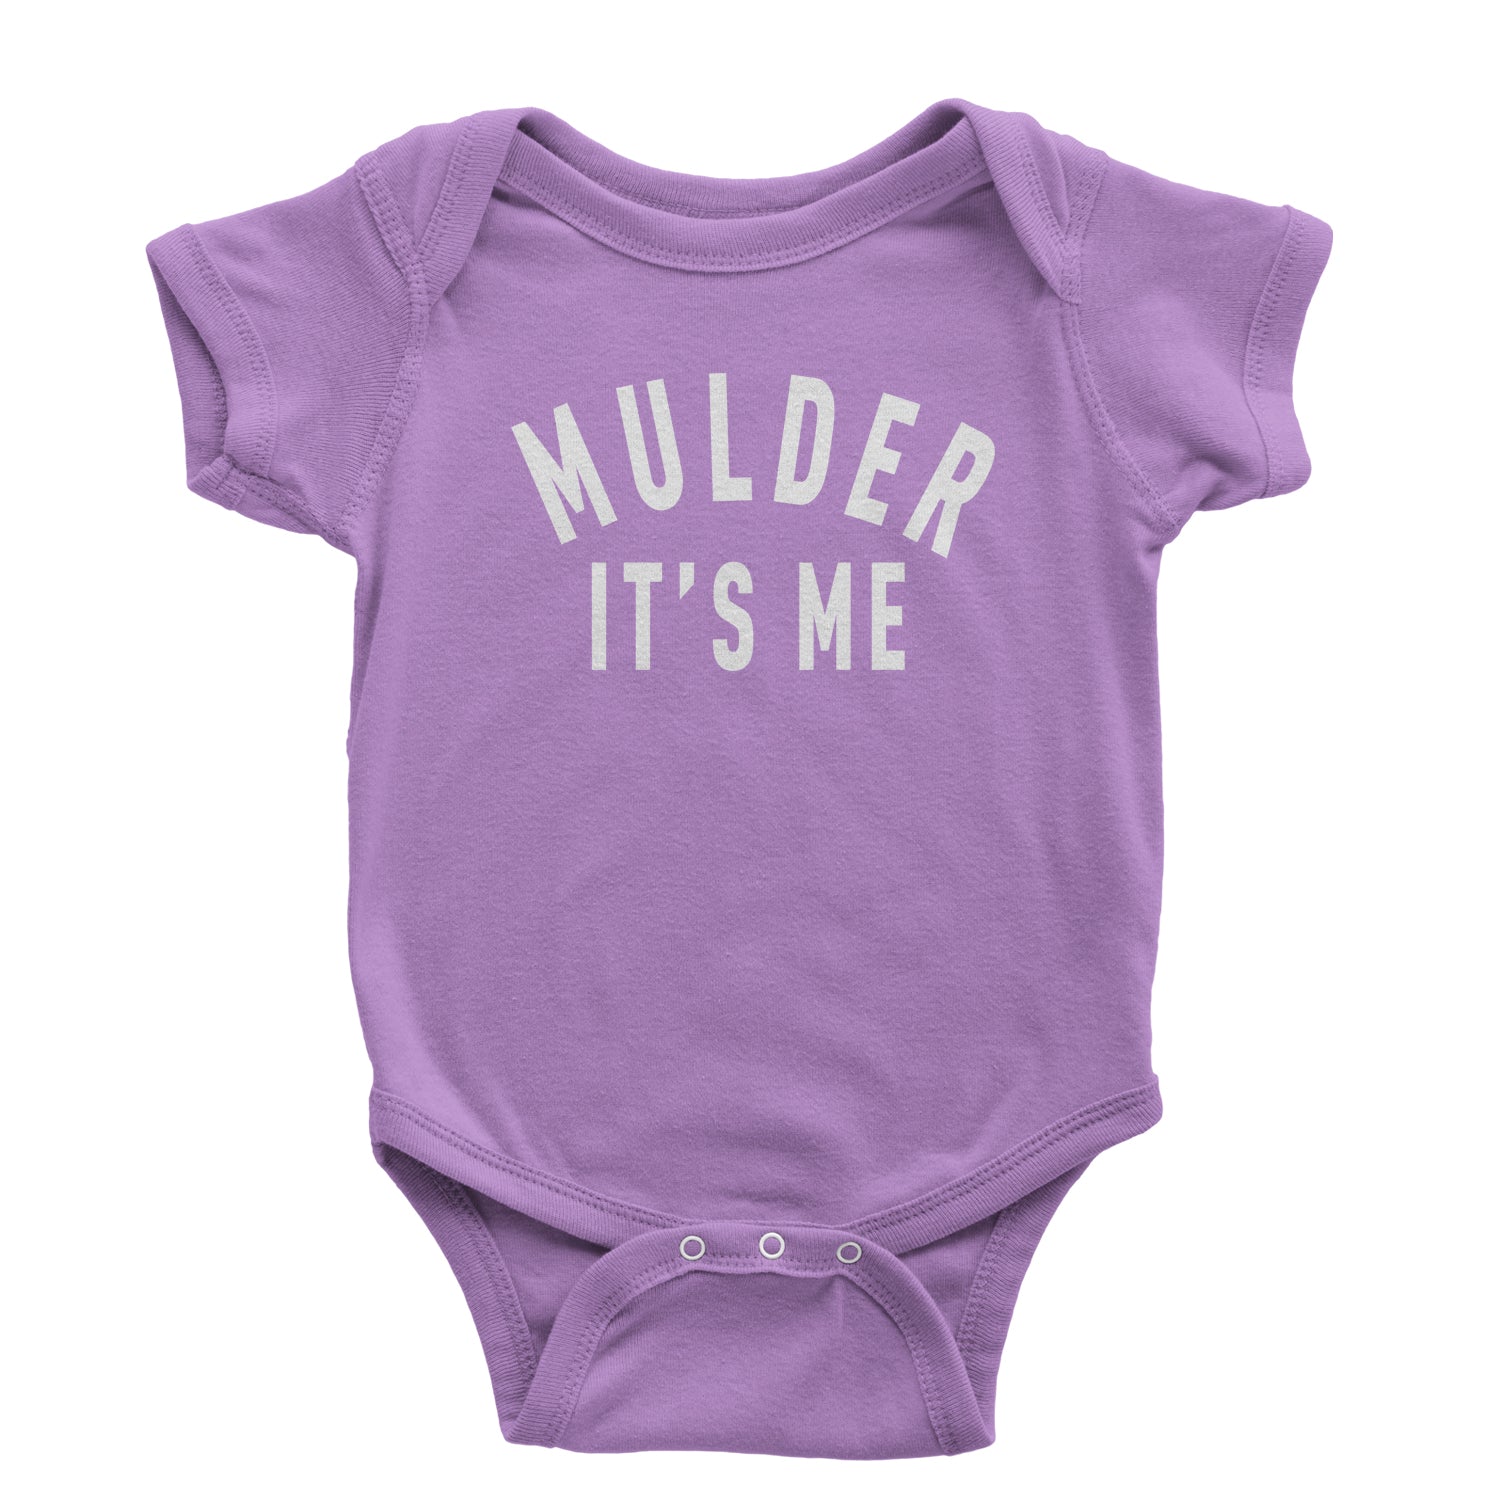 Mulder, It's Me Infant One-Piece Romper Bodysuit 51, area, believe, files, is, mulder, out, scully, the, there, truth, x, xfiles by Expression Tees